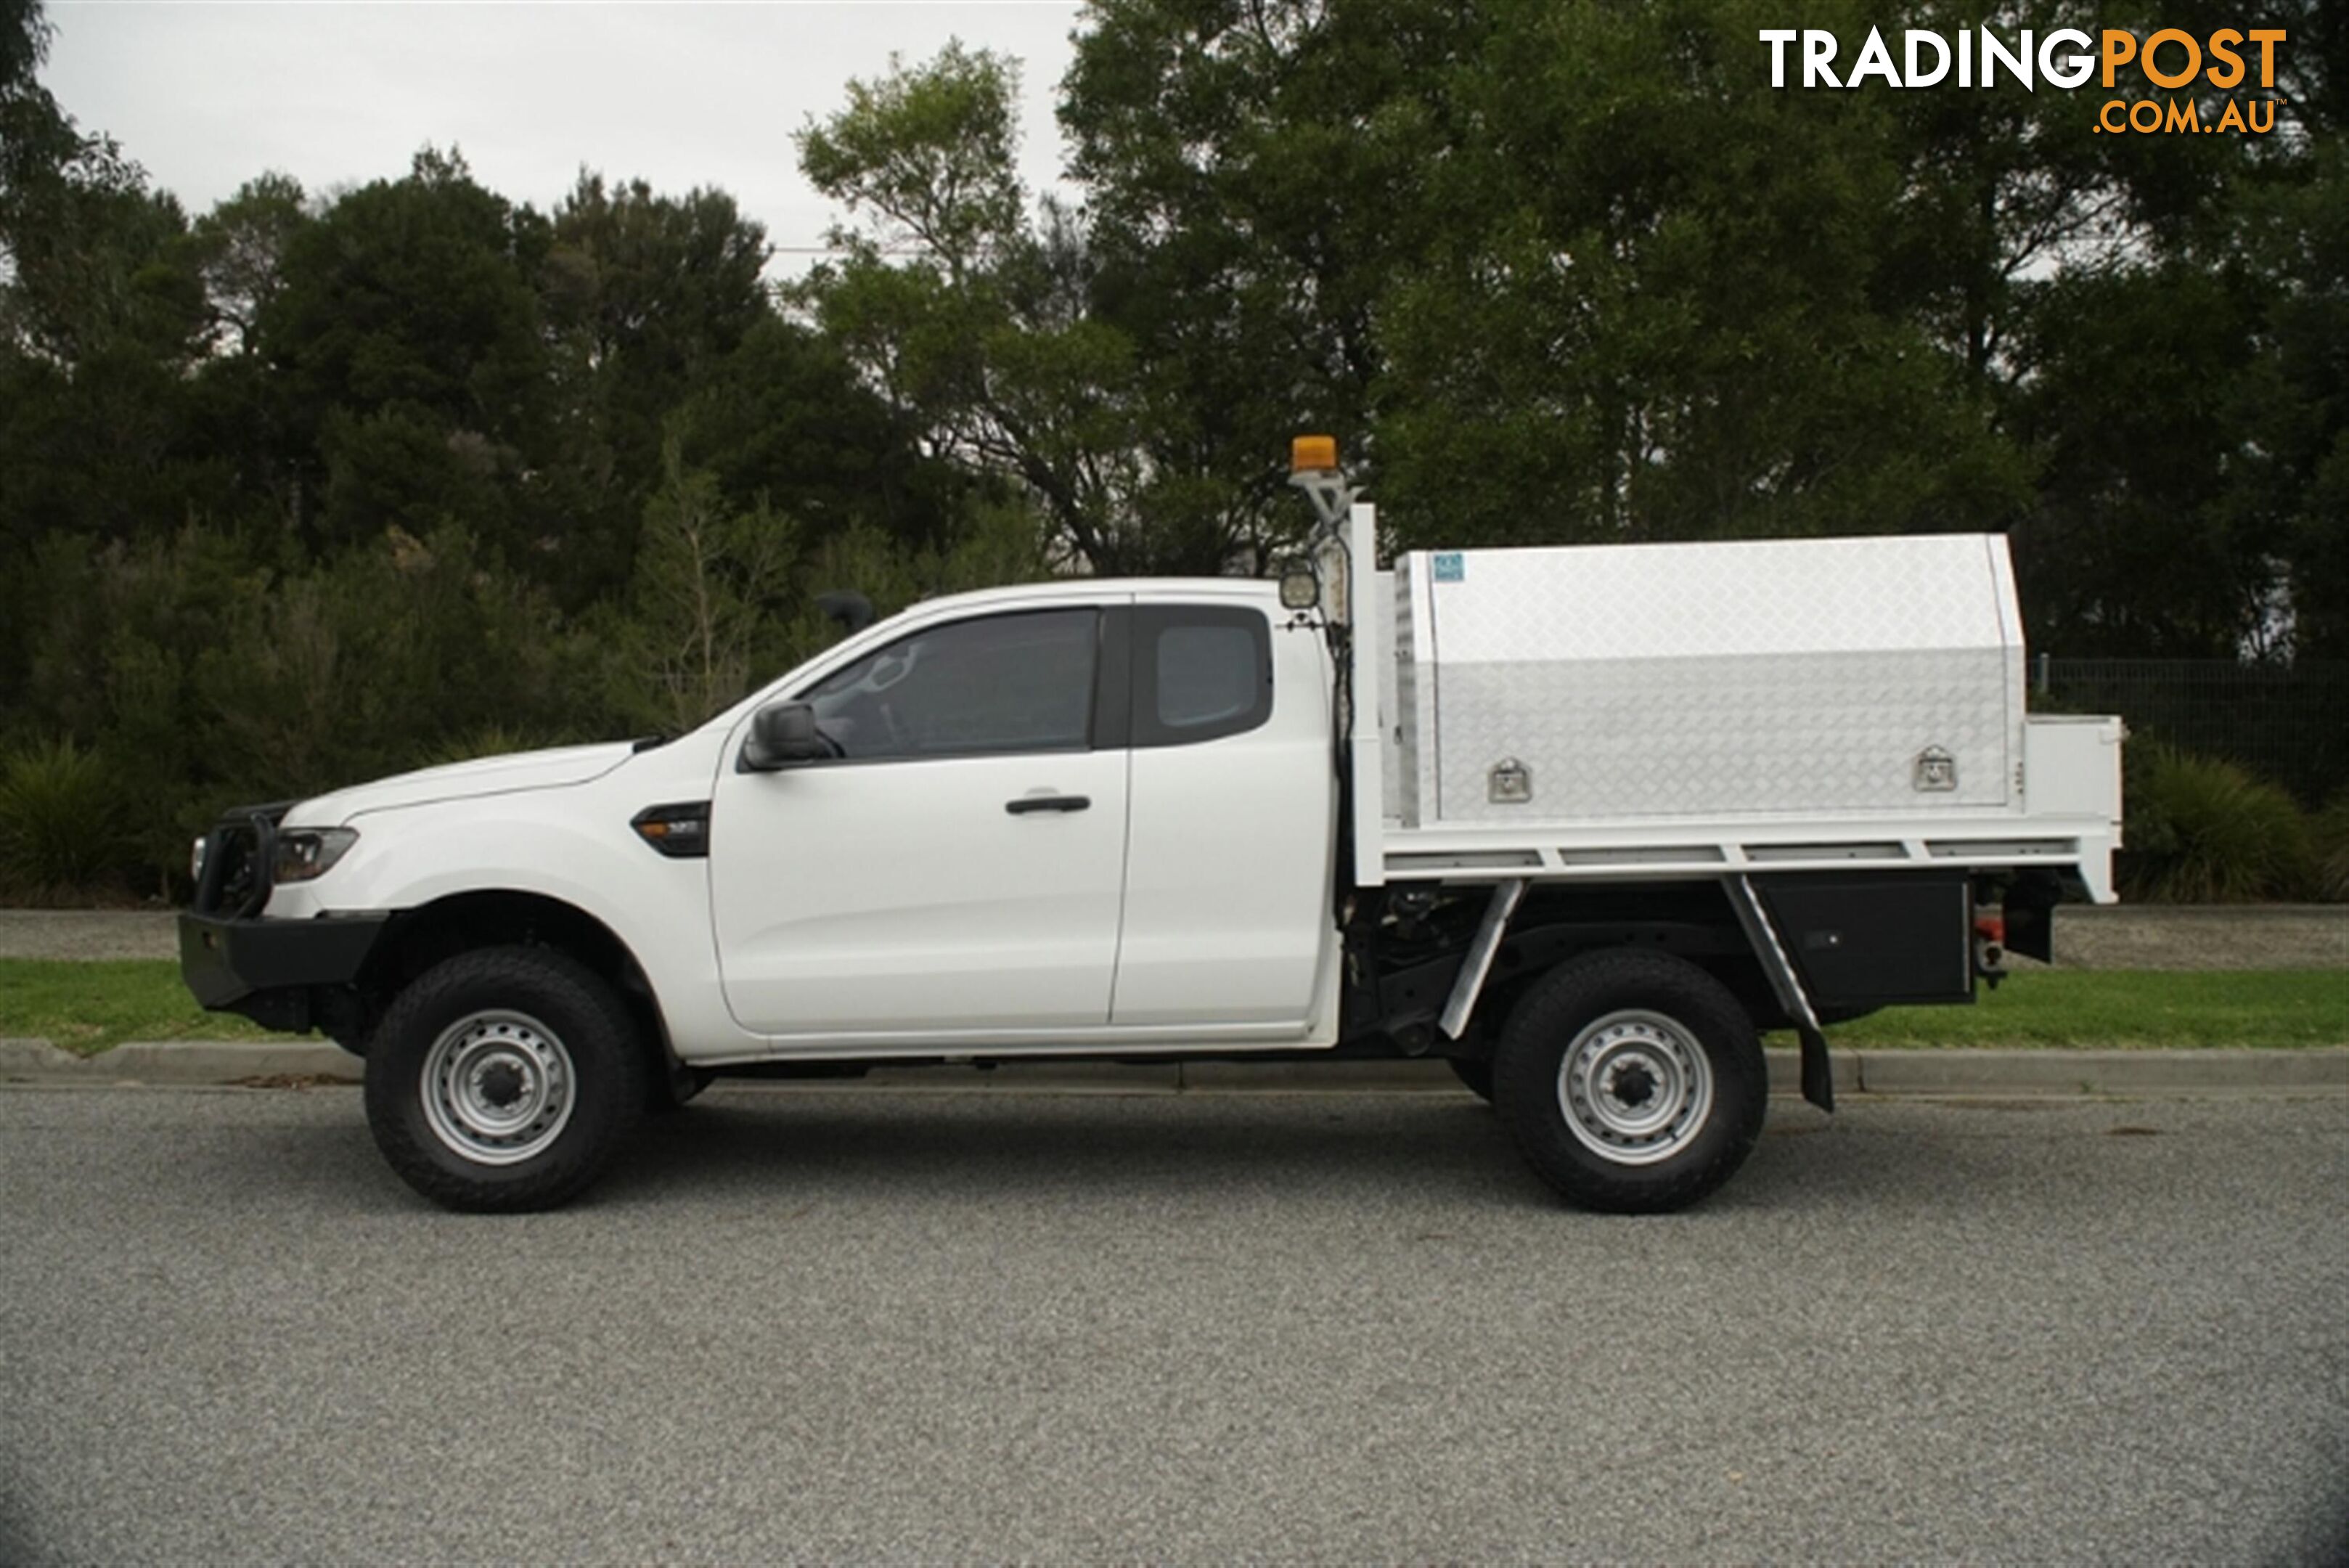 2016 FORD RANGER XL EXTENDED CAB PX MKII CAB CHASSIS